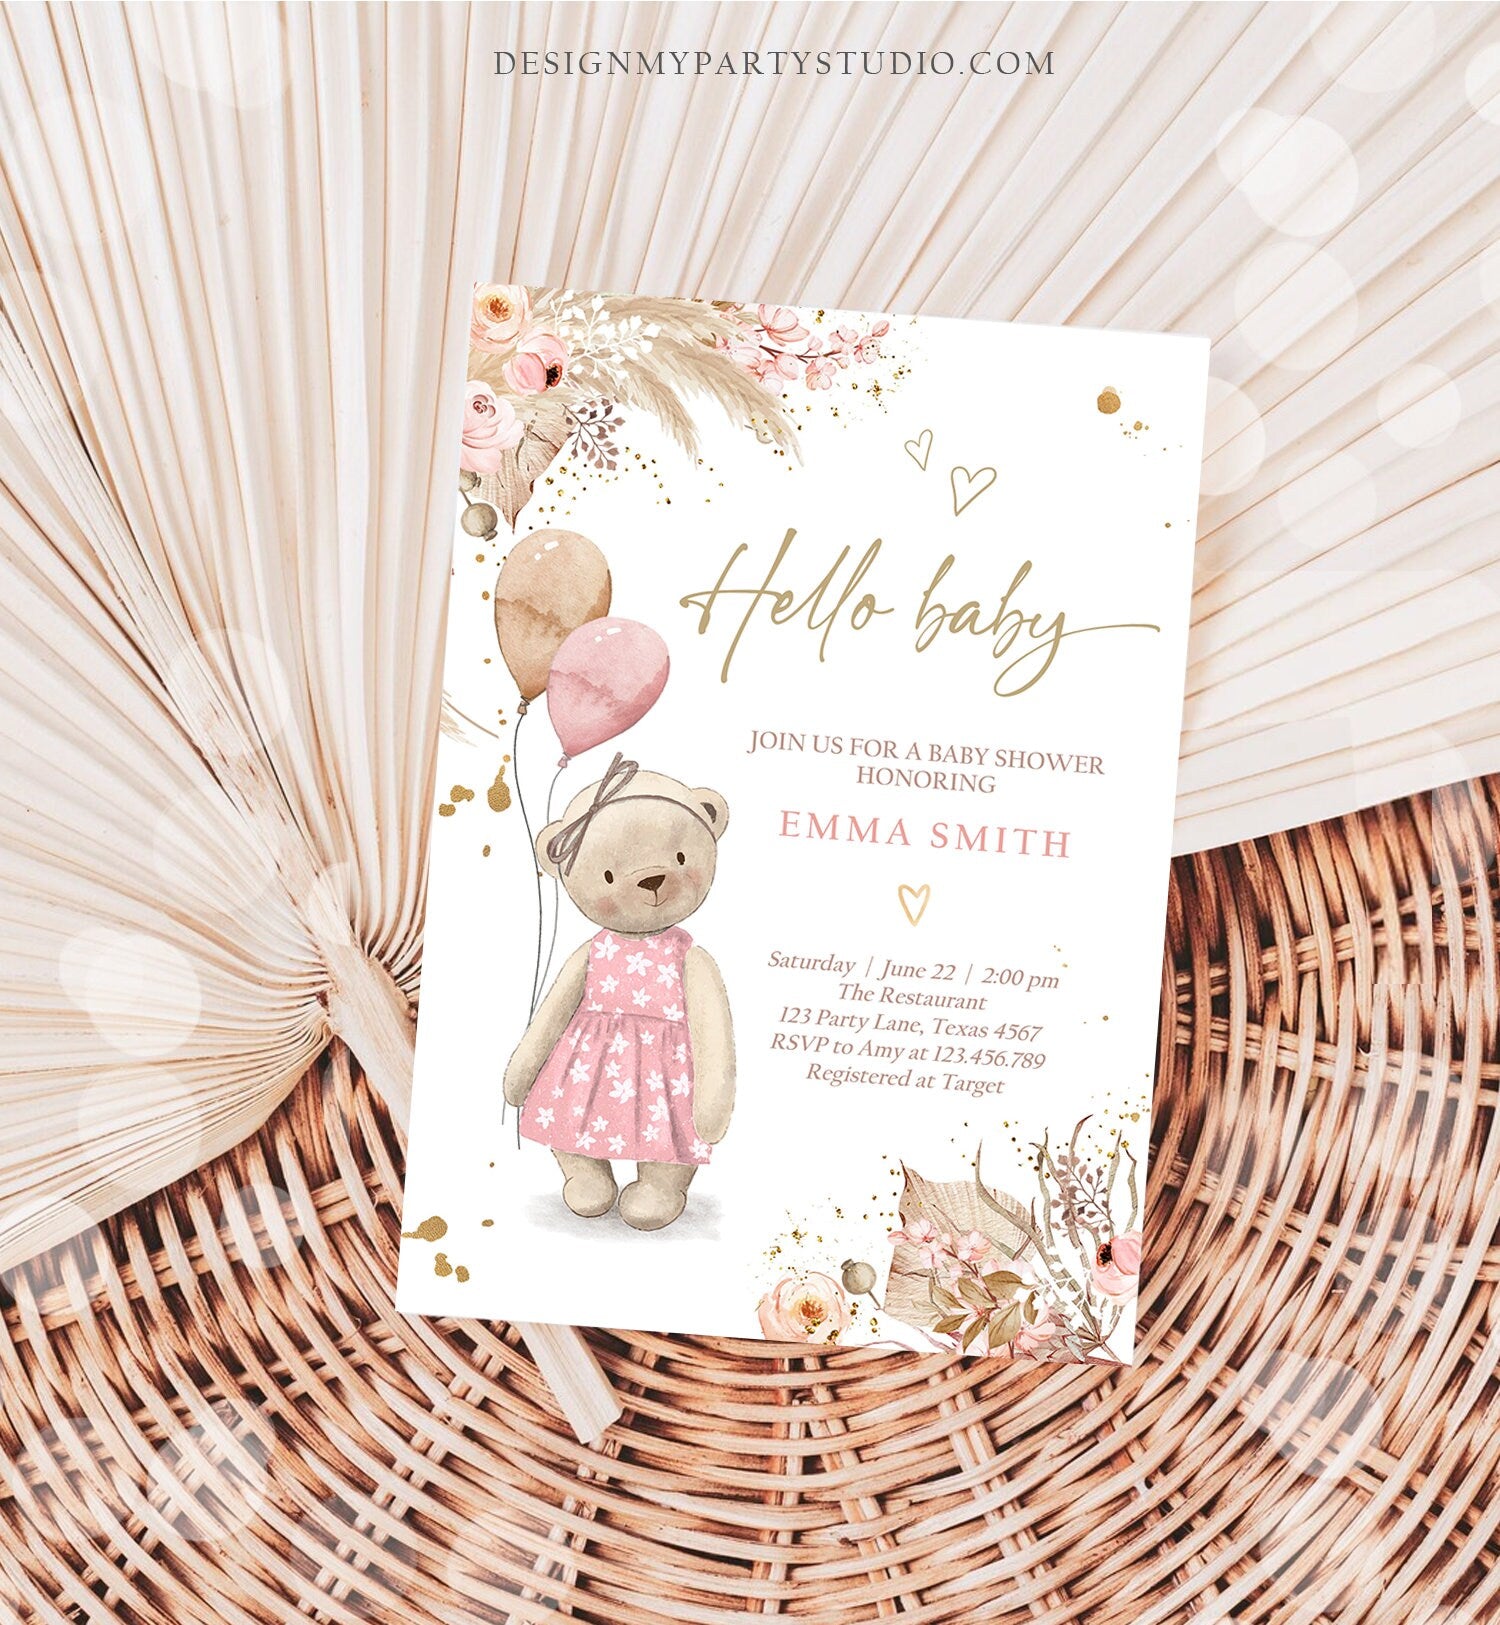 Editable Boho Teddy Bear Baby Shower Invitation We can Bearly Wait Girl Pink Bohemian Pampas Grass Cute Template Instant Download Corjl 0421